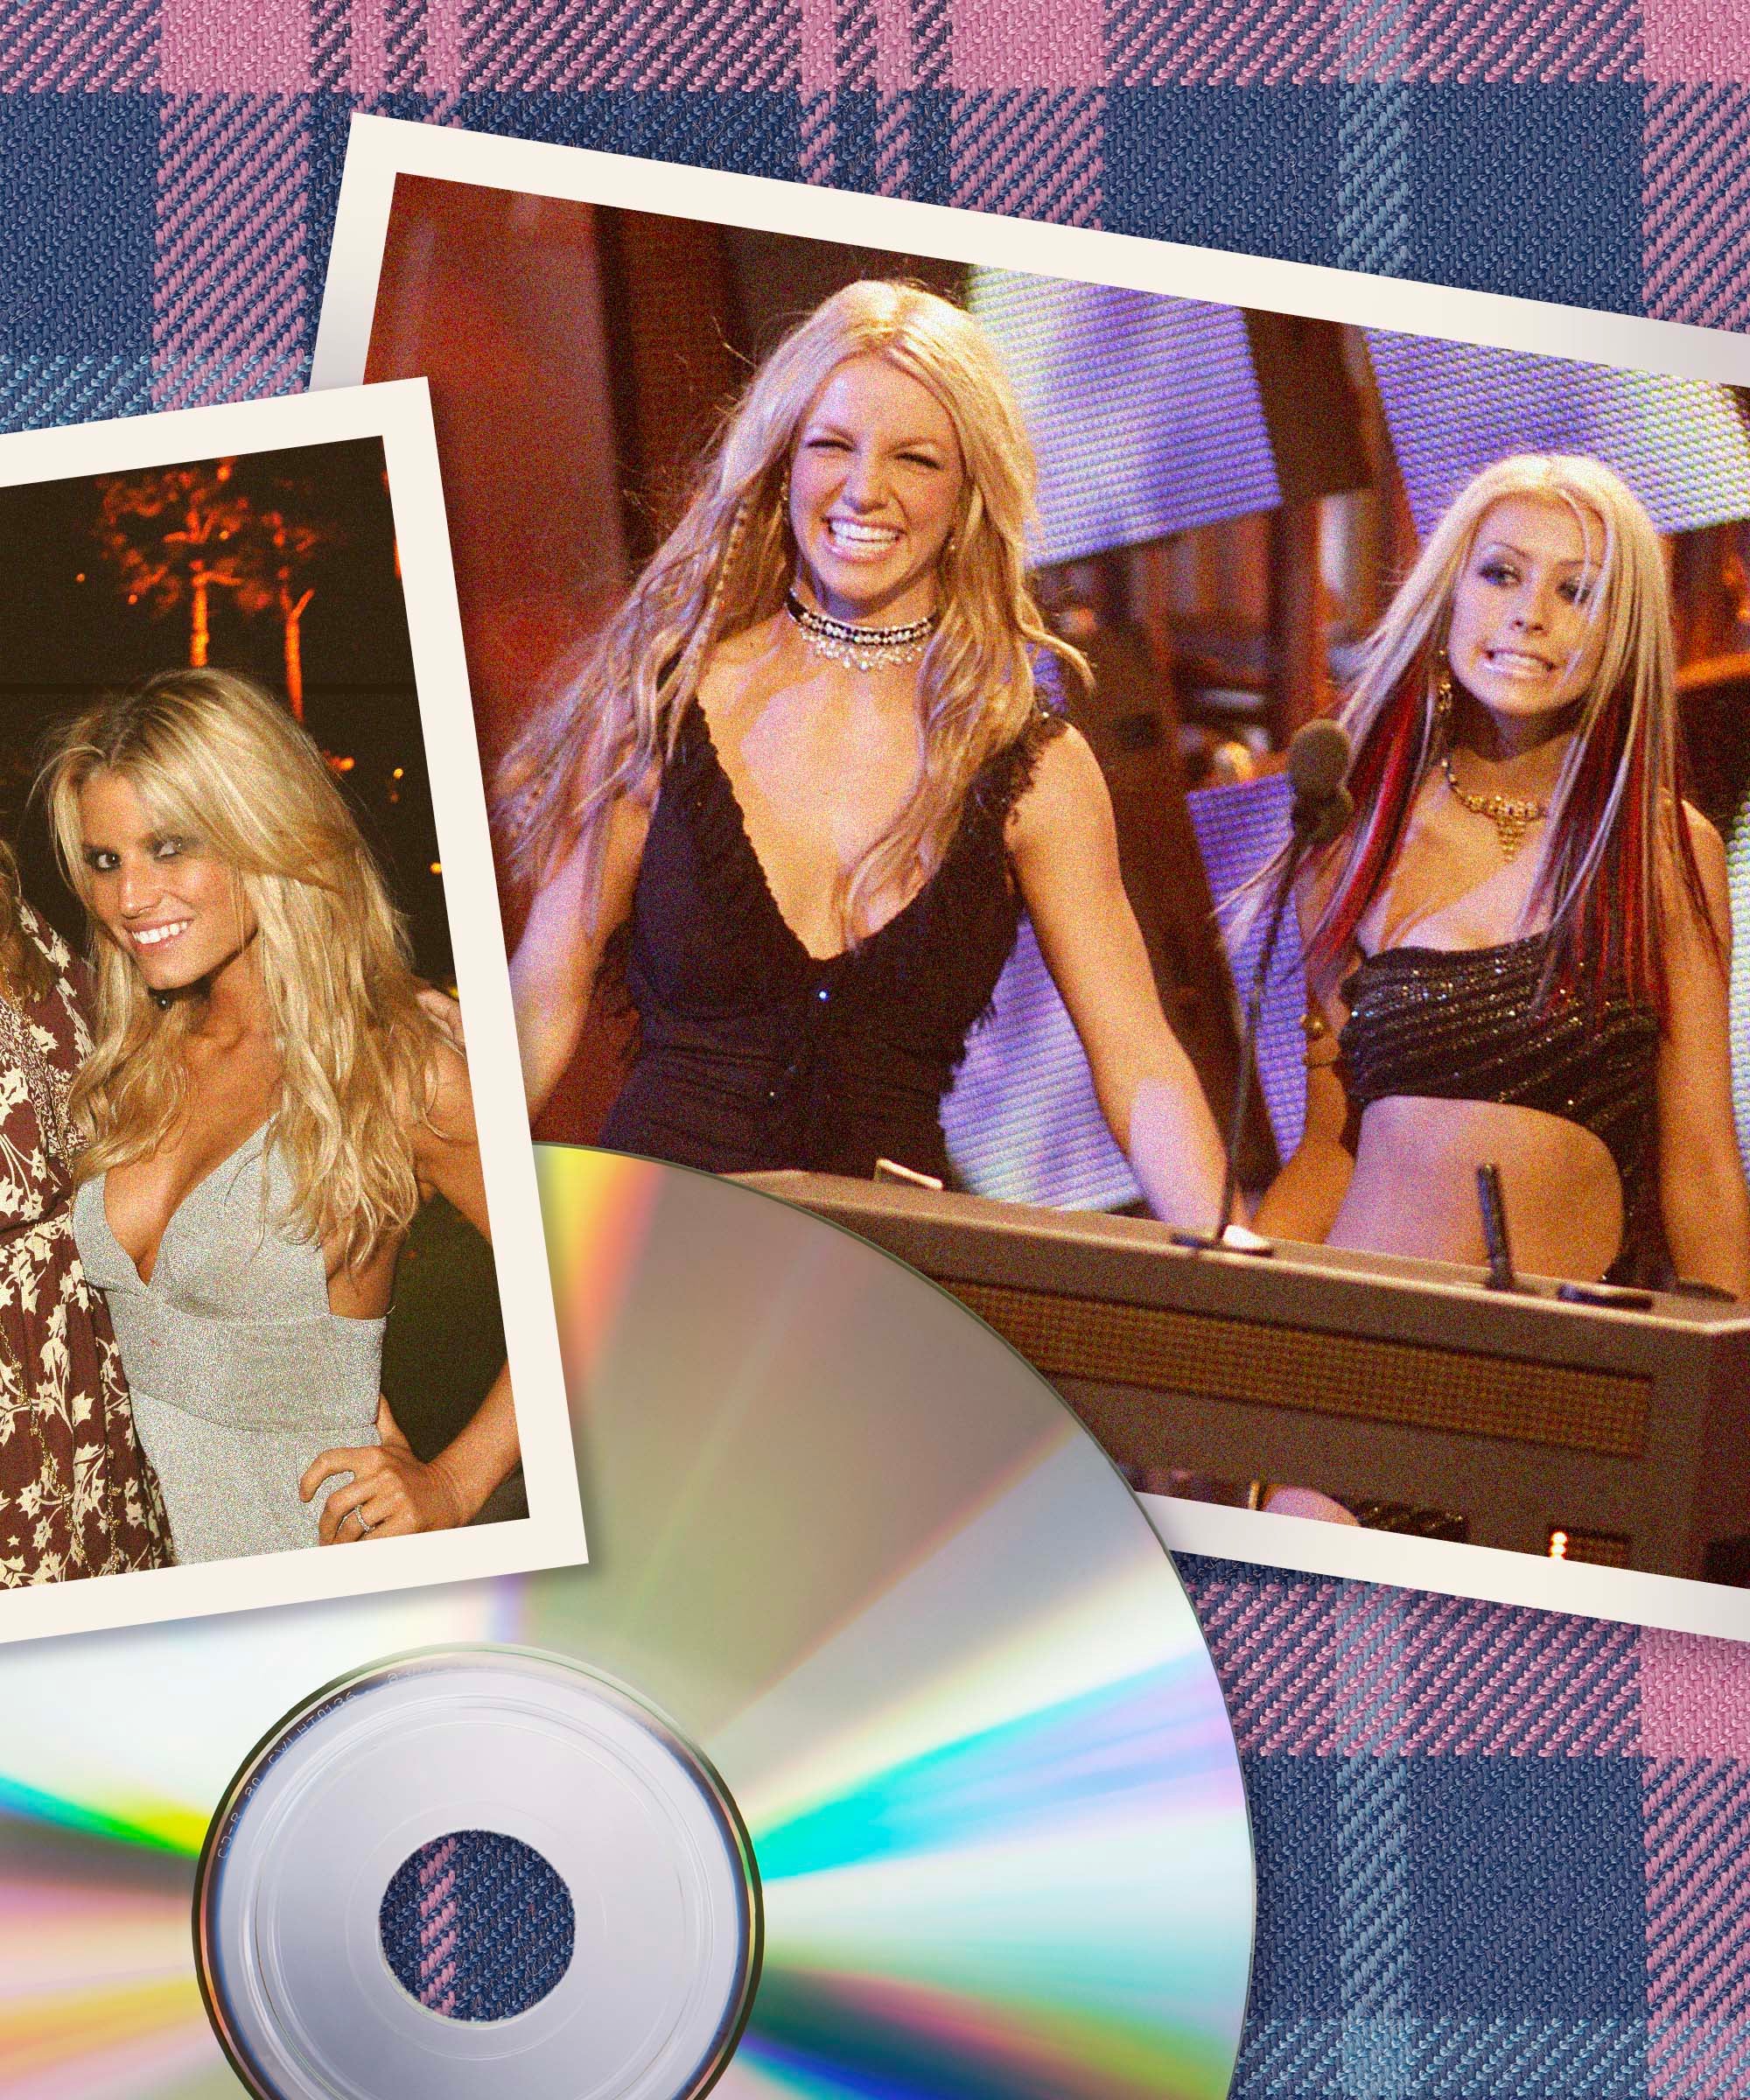 Why Britney & Christina Had To Be Virgins For The Media